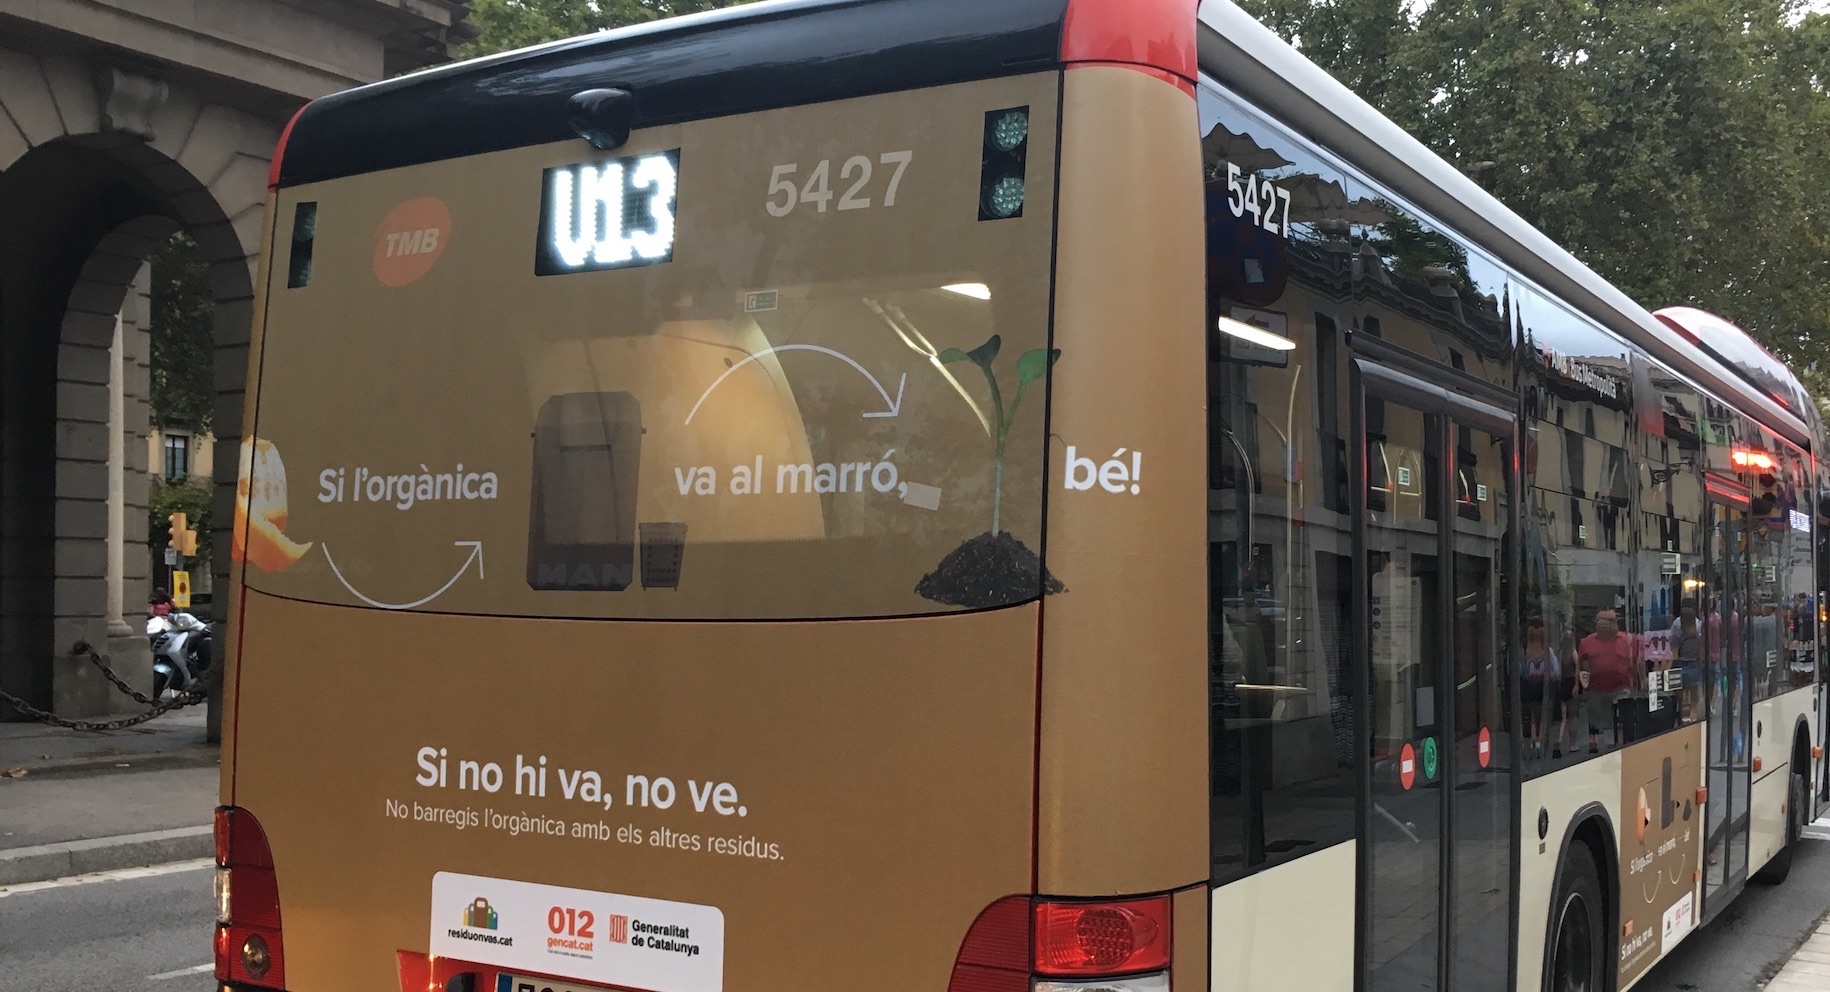 City of Barcelona placing ads on public transport to educate people